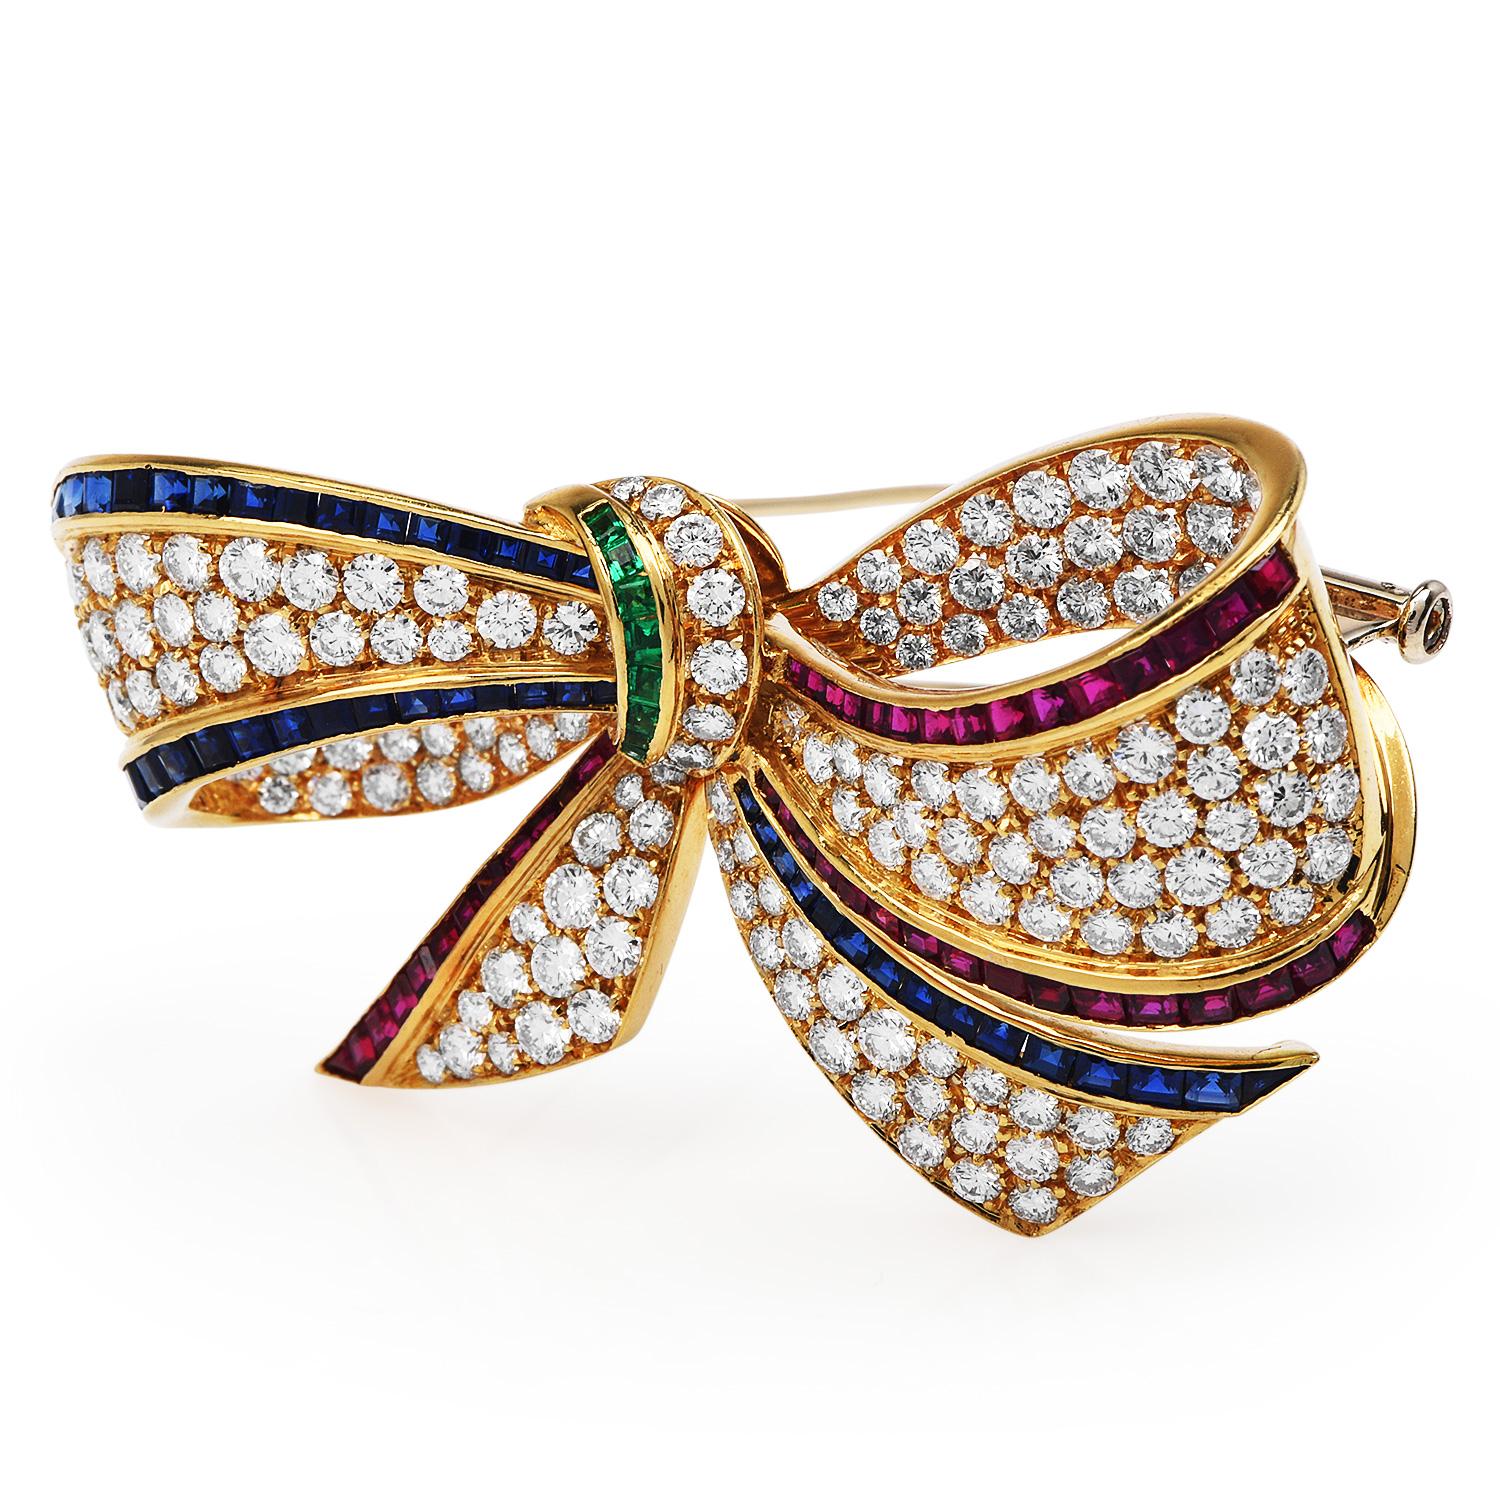 Large Diamond Multi Gem Sapphire Emerald Ruby 18k Gold Bow Pin Brooch.

Dazzle yourself with this 1980S Diamond multi gems 18k yellow gold Vintage Bow Brooch pin. 

They are exquisitely crafted in solid 18k yellow gold, weighing approx.